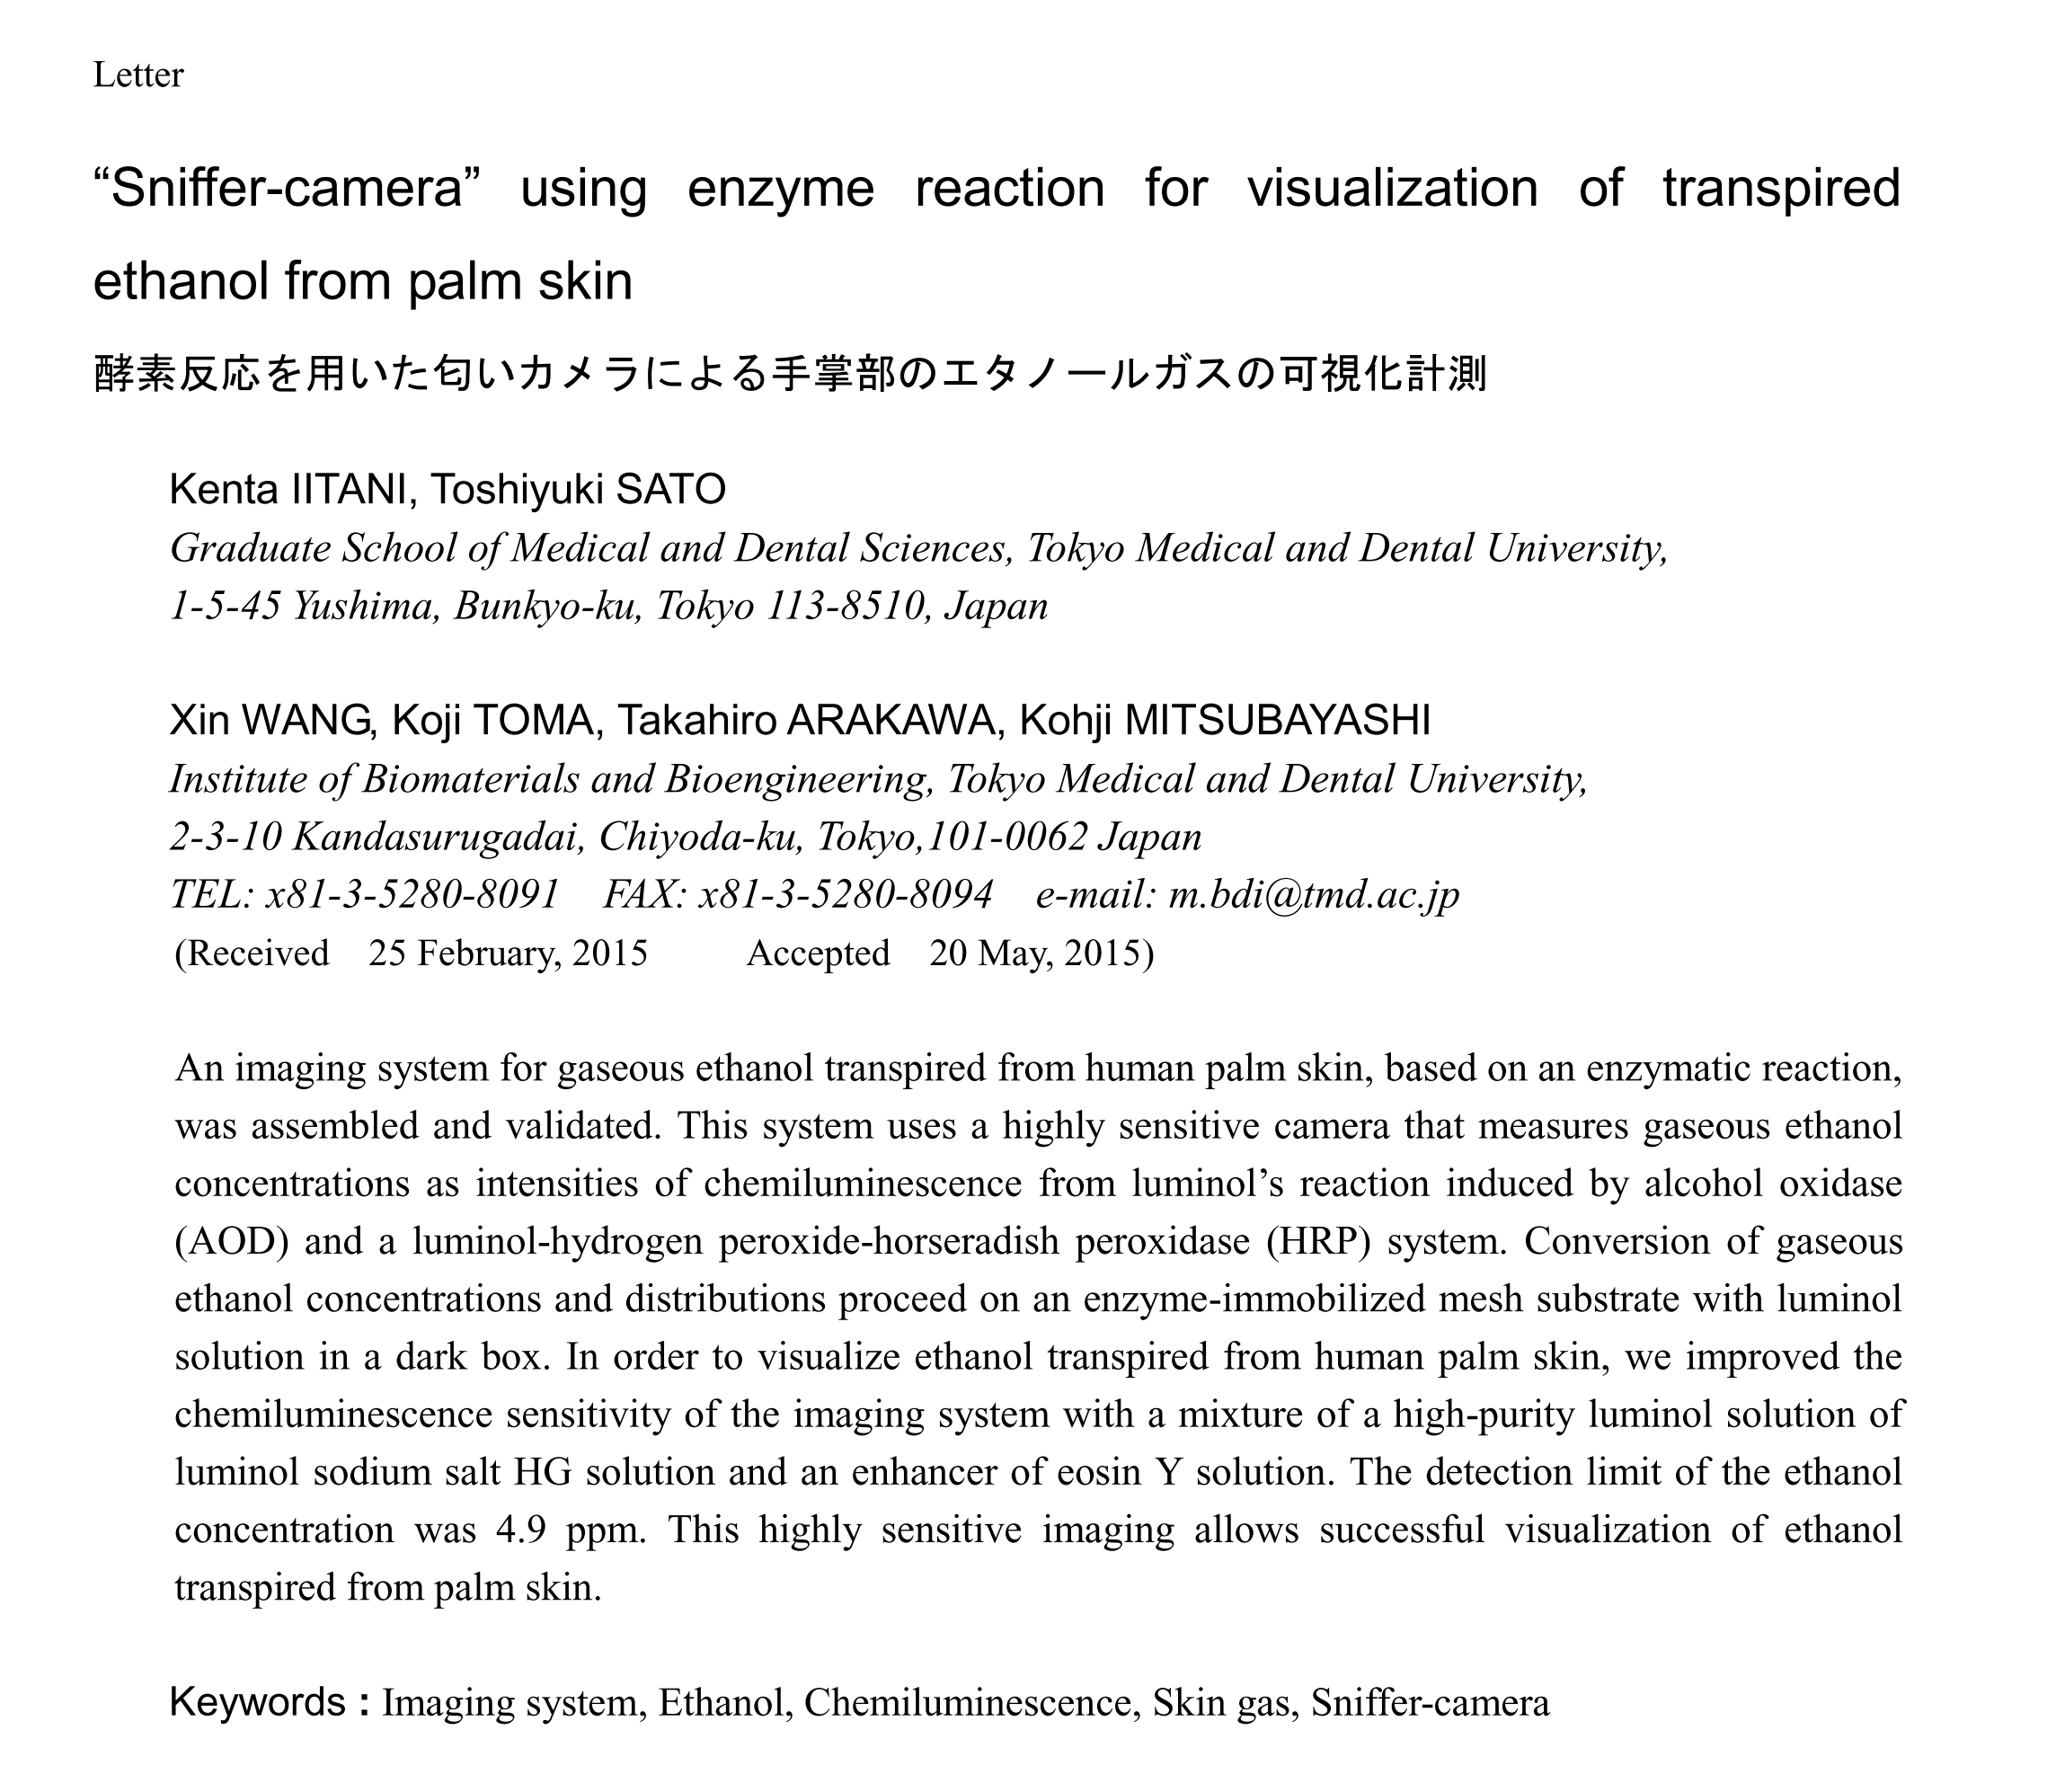 “Sniffer-camera” using enzyme reaction for visualization of transpired ethanol from palm skin